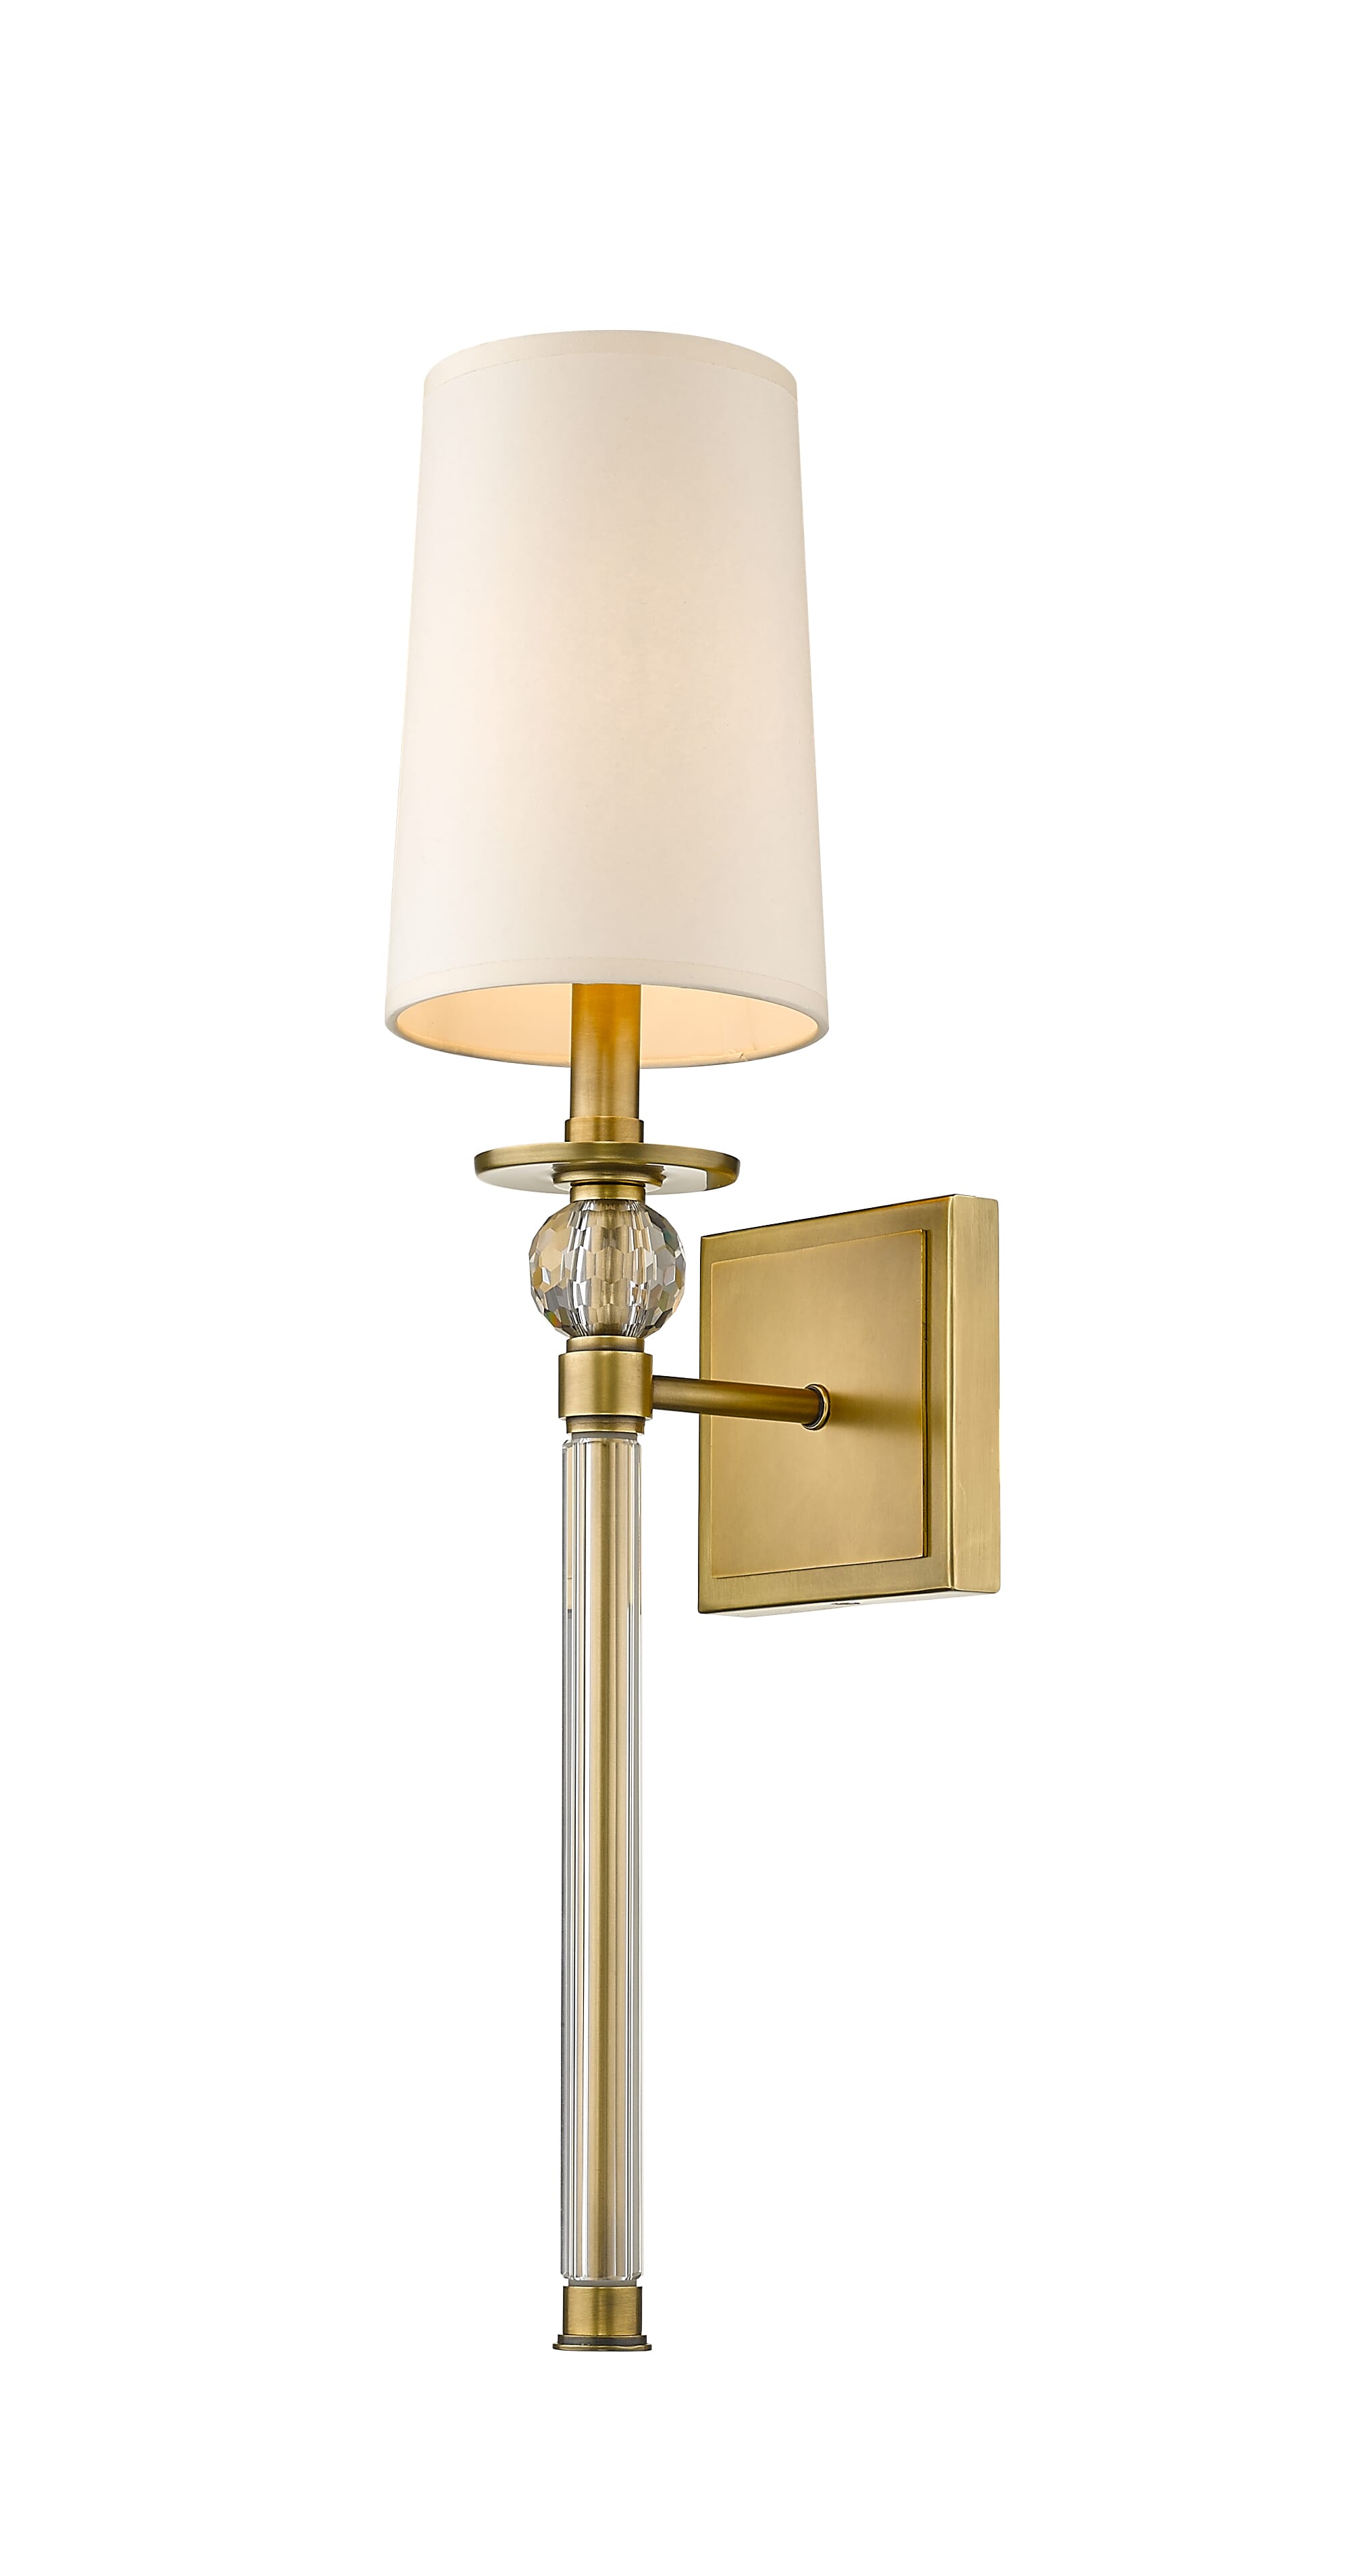 Mia 1-Light Wall Sconce In Rubbed Brass